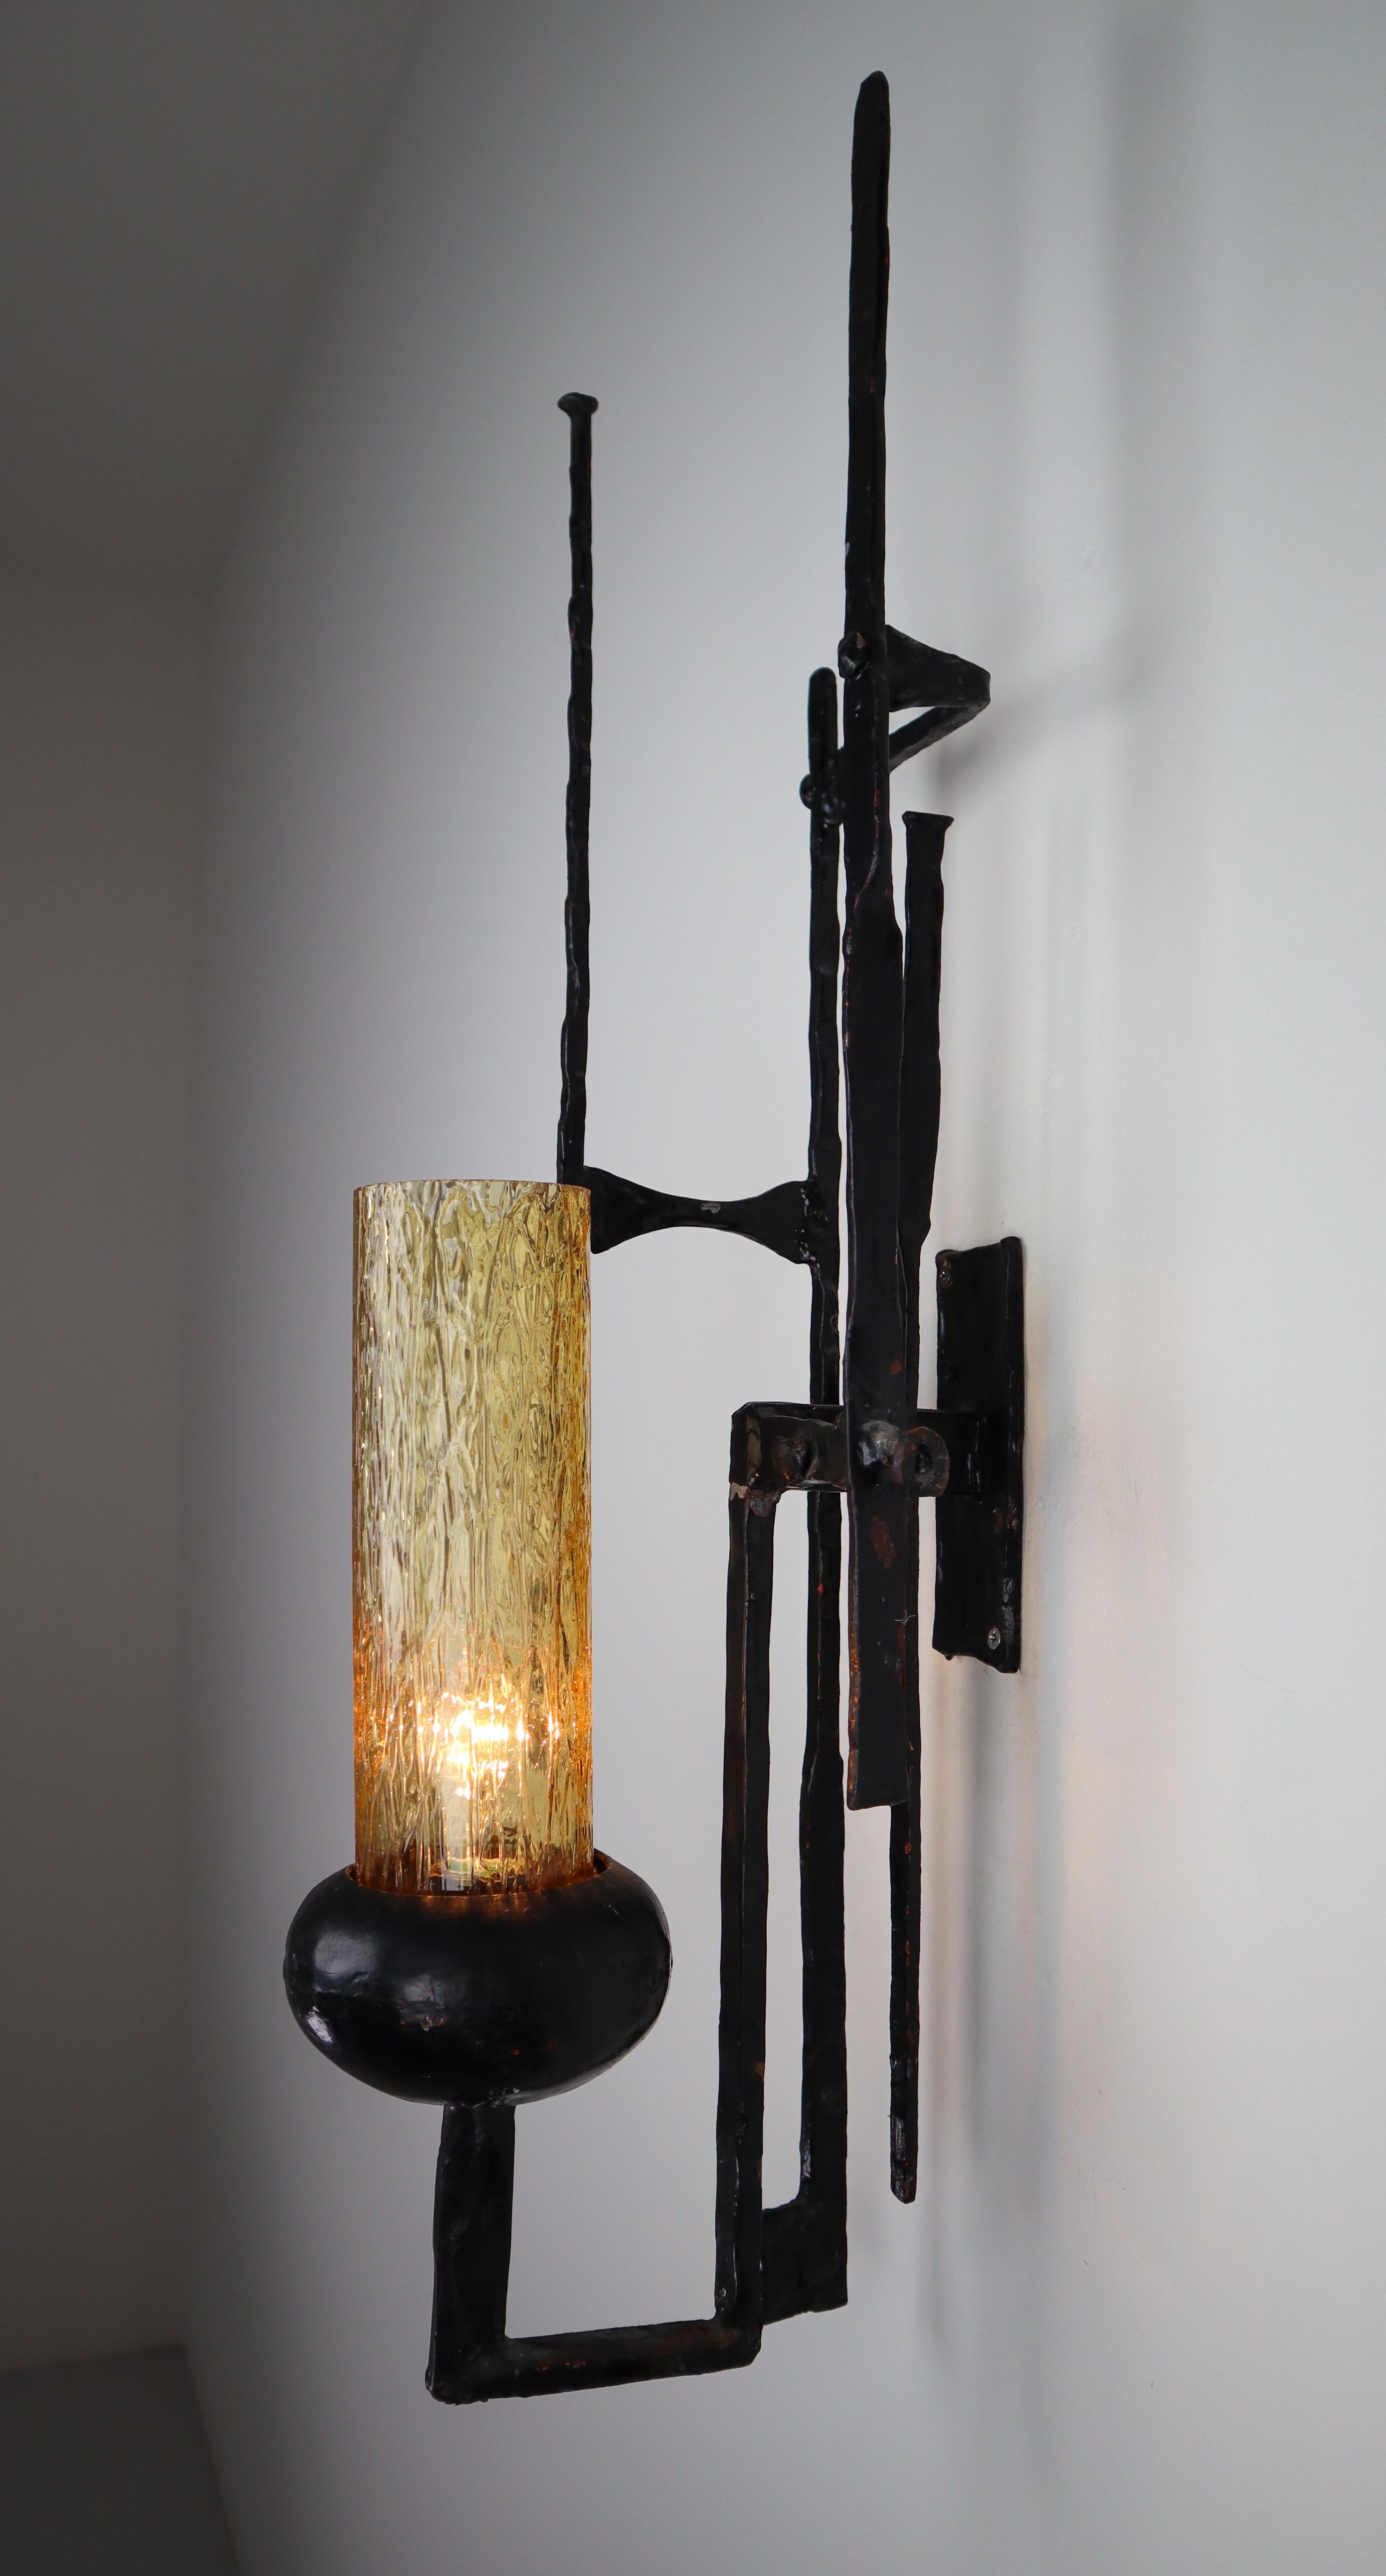 Large patinated iron and amber color glass Brutalist wall sconces or sculptures, Italy, 1960s. Pure artistic handwrought sculptural frame decorated with amber glass wall lamp/decoration. The pleasant light it spreads is very atmospheric, these wall